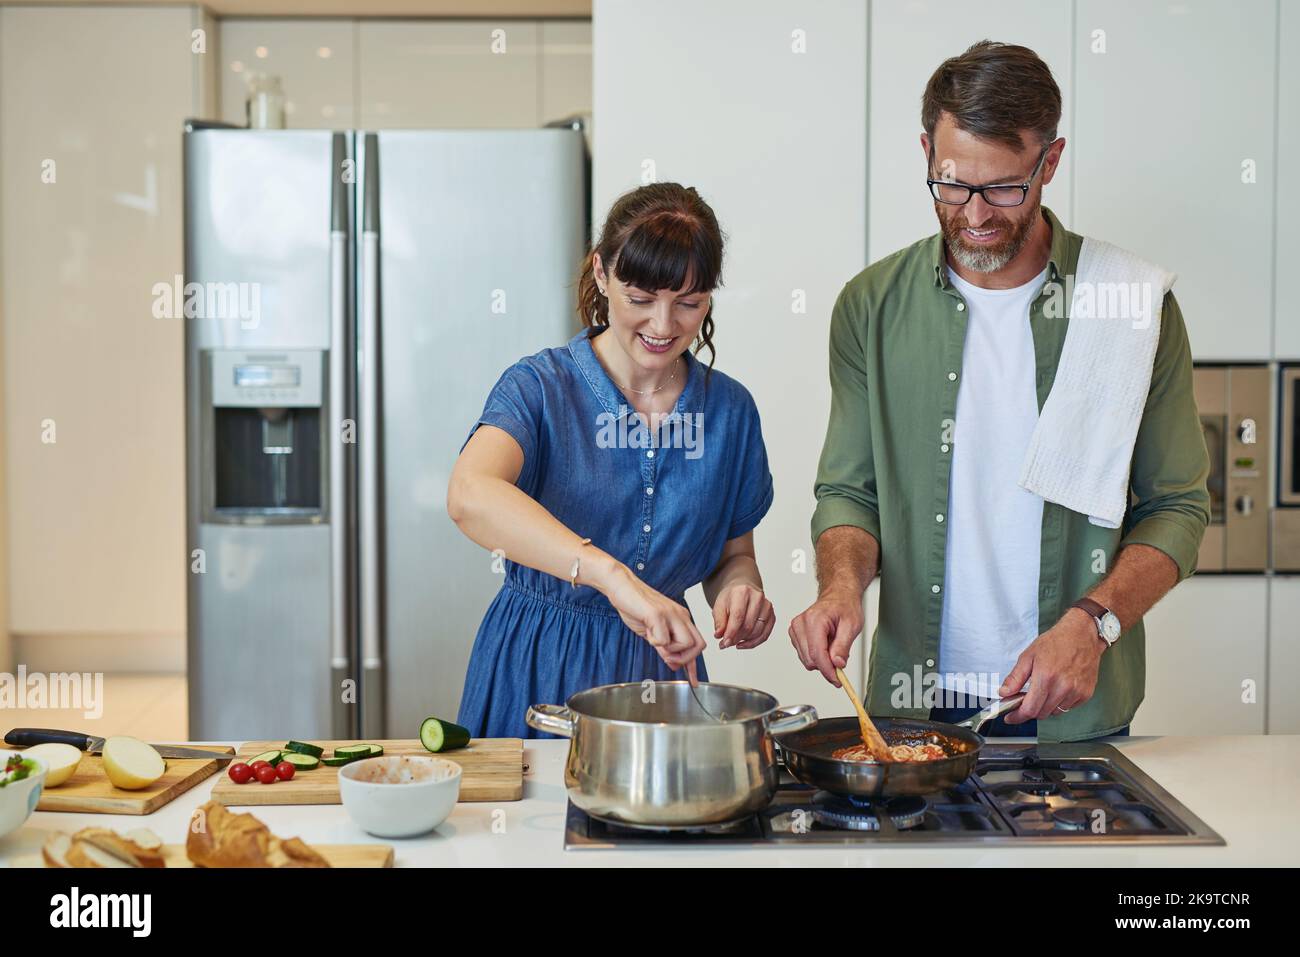 Its going to be twice as tasty. a mature couple cooking together at home. Stock Photo